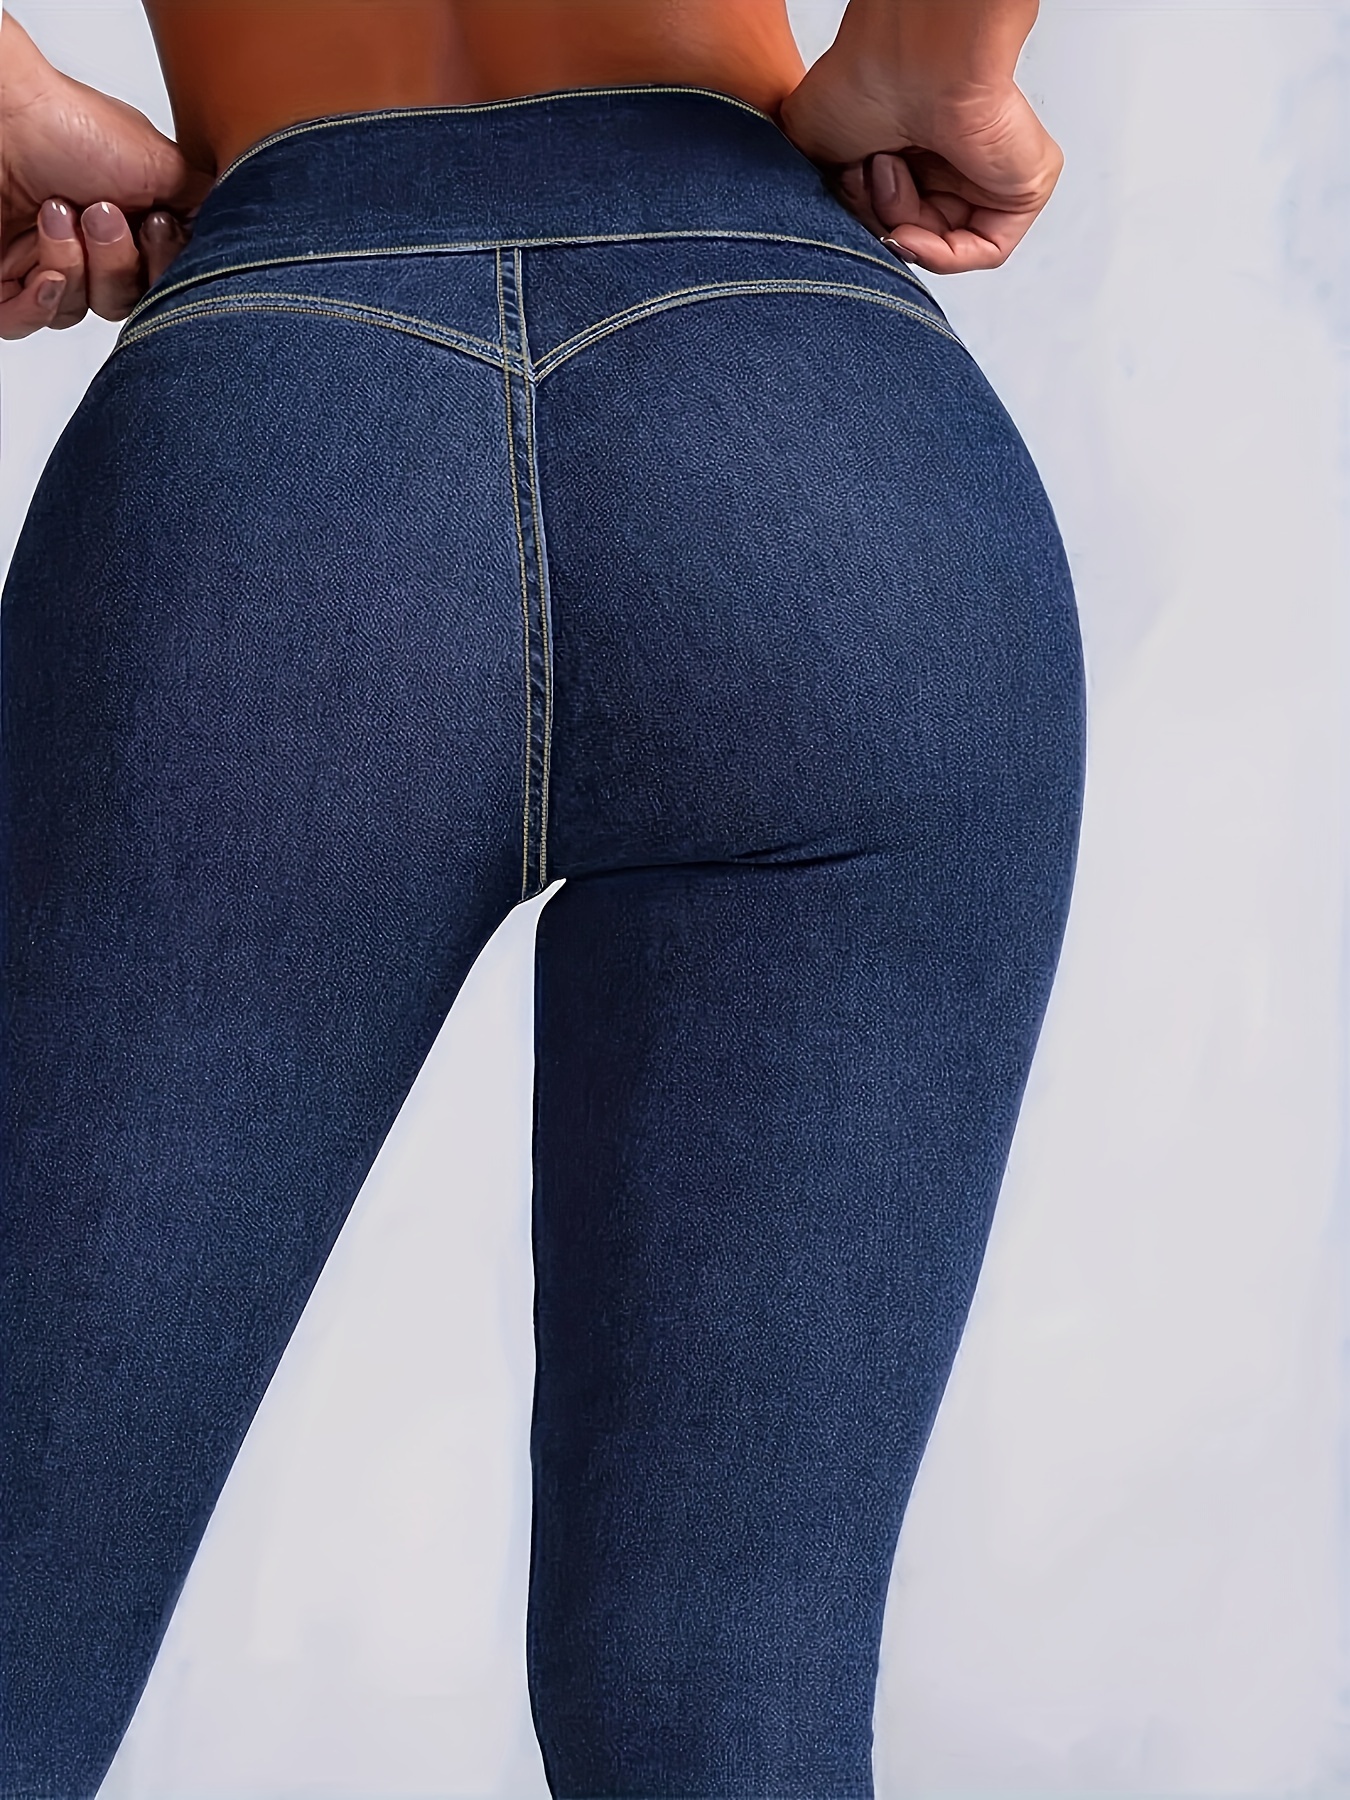 Women Colombian Butt Lifting Jeans Skinny Push Up Skinny High Rise Waist  Pants